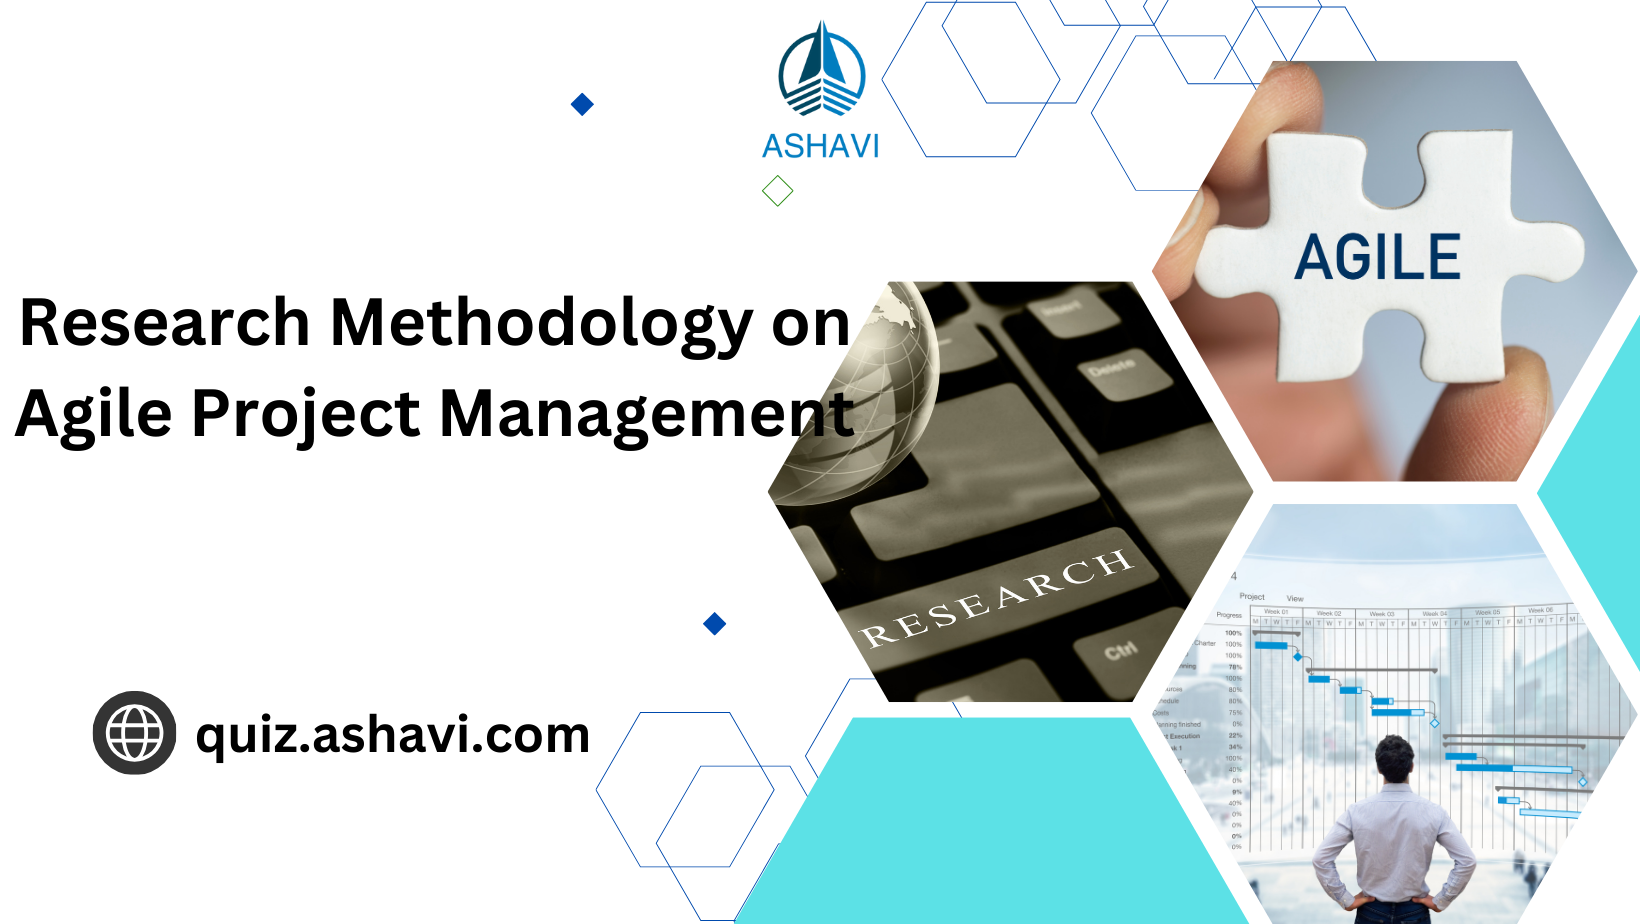 Research Methodology on Agile Project Management